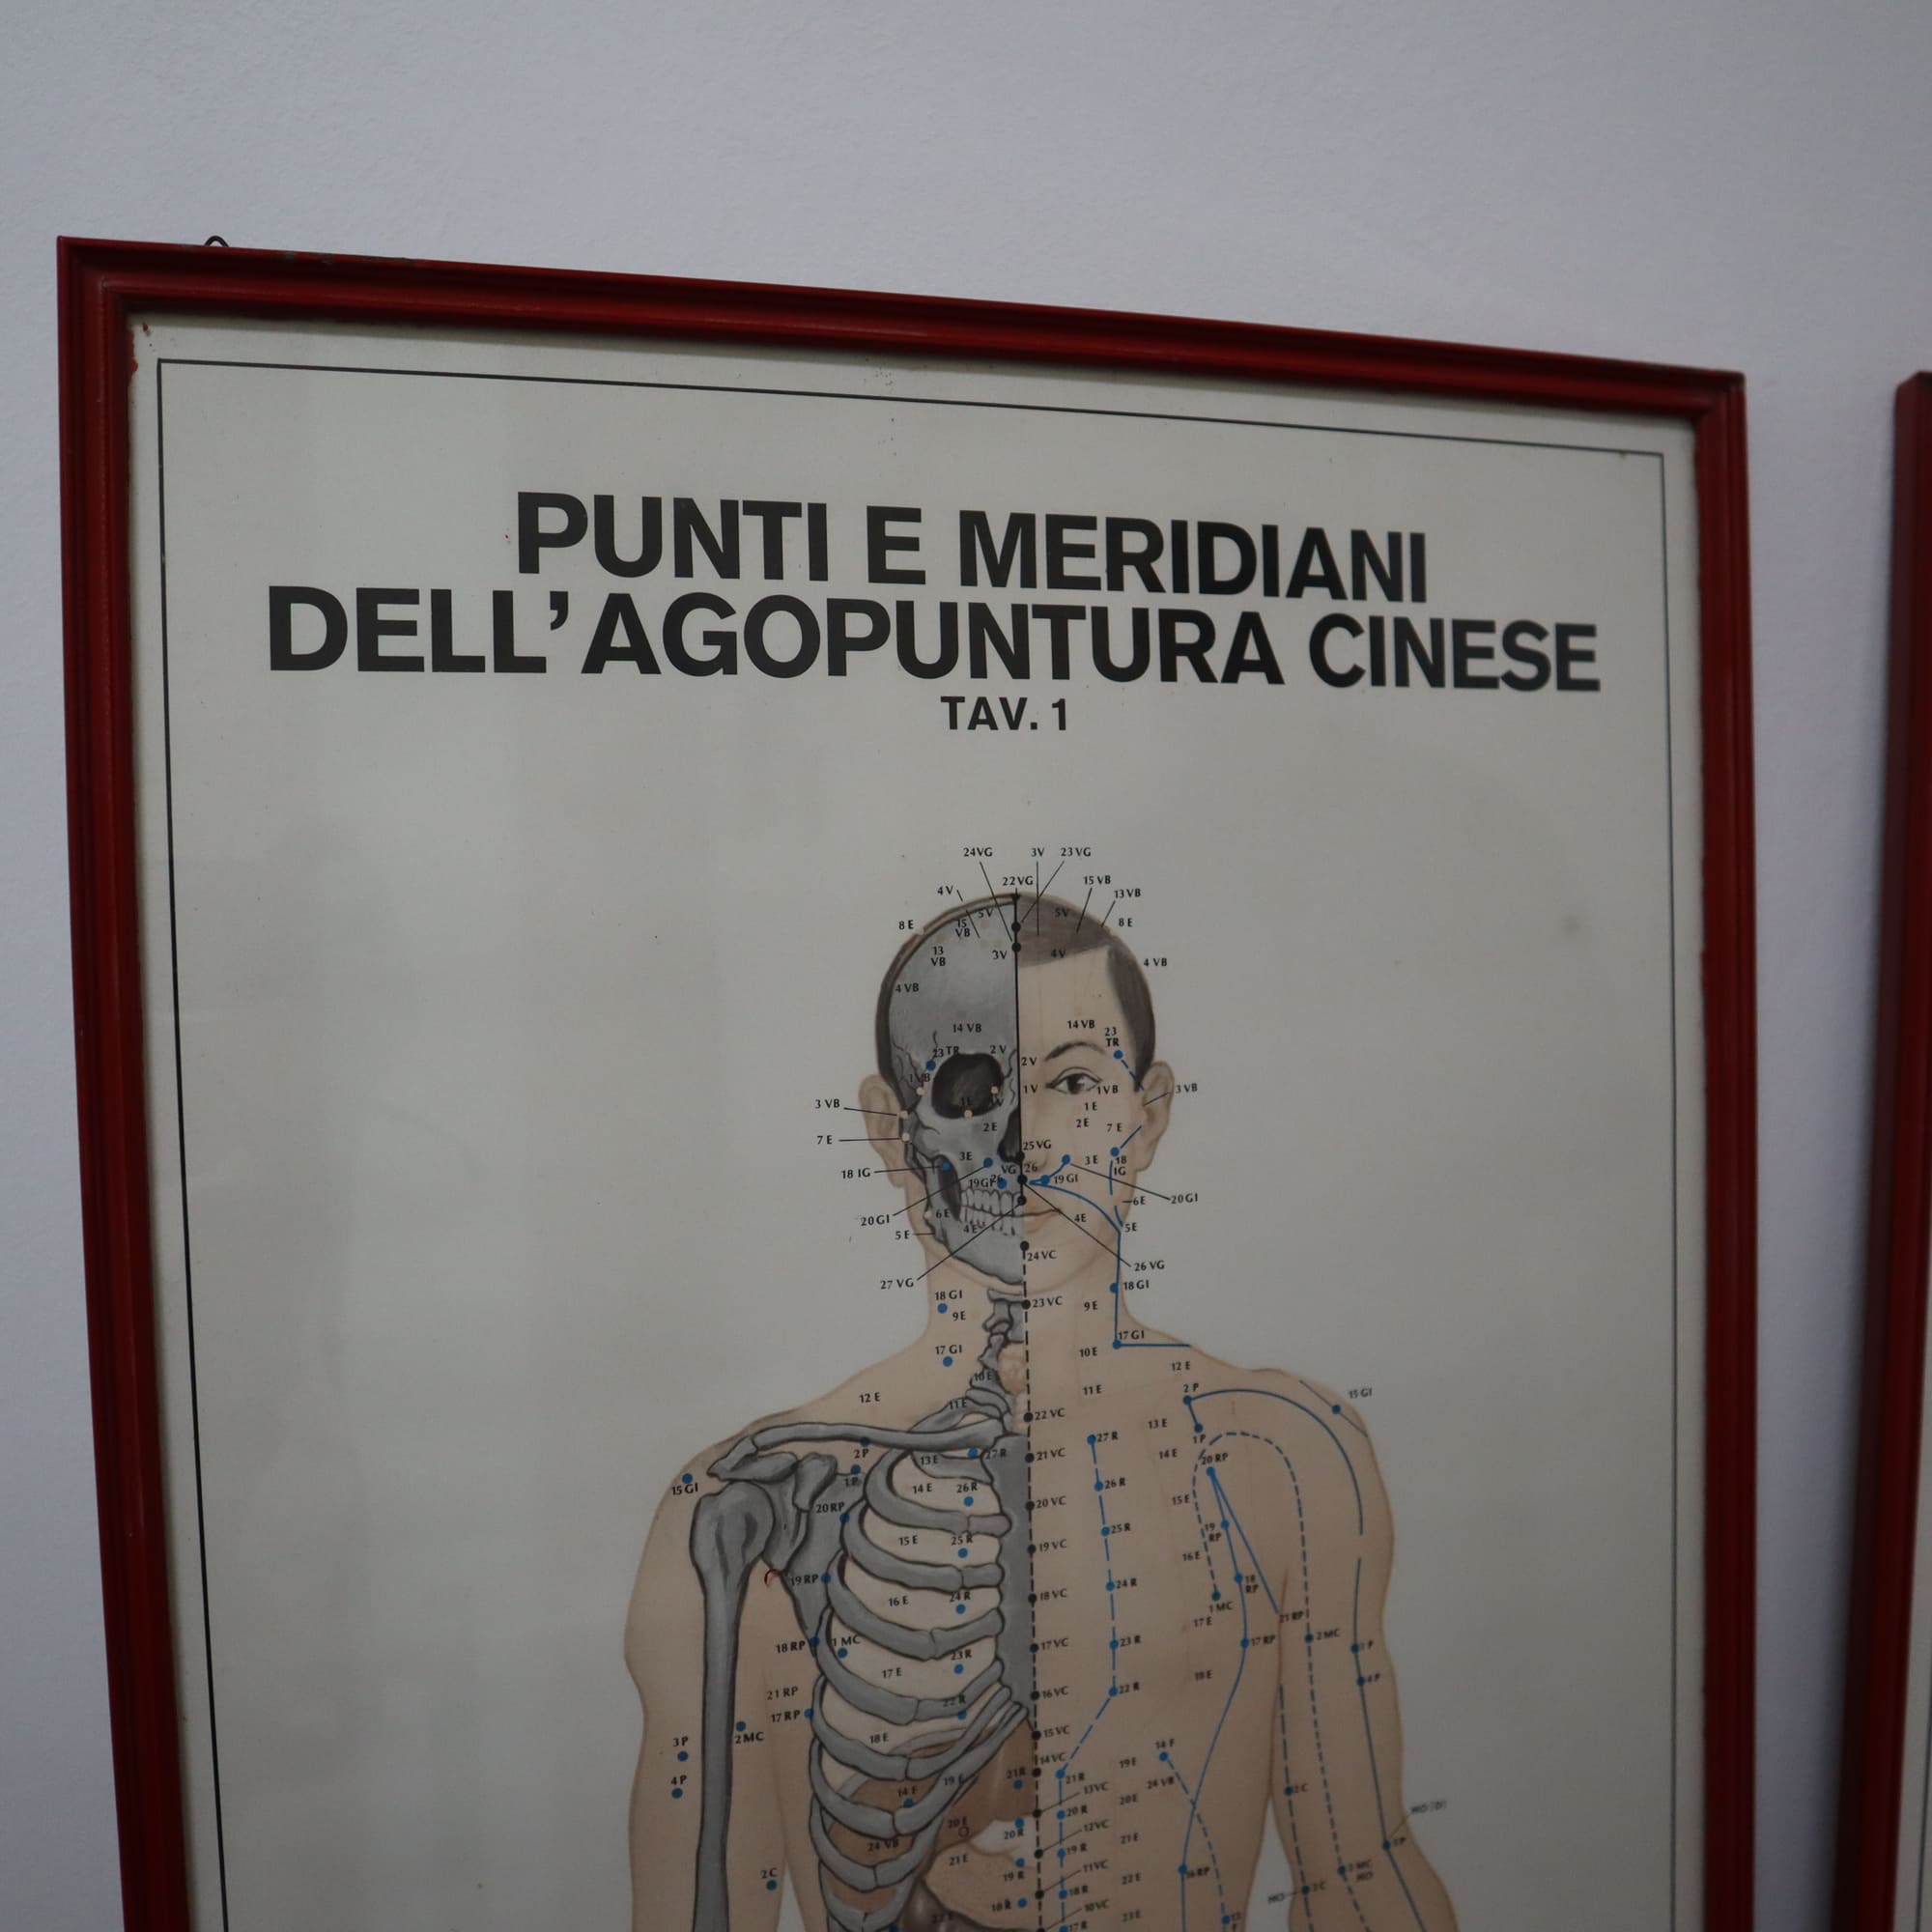 visionidepoca-paintings-set-chinese-acupuncture-tables-by-agoelettronica-turin-perfect-conditions-with-red-frame-made-in-italy-1